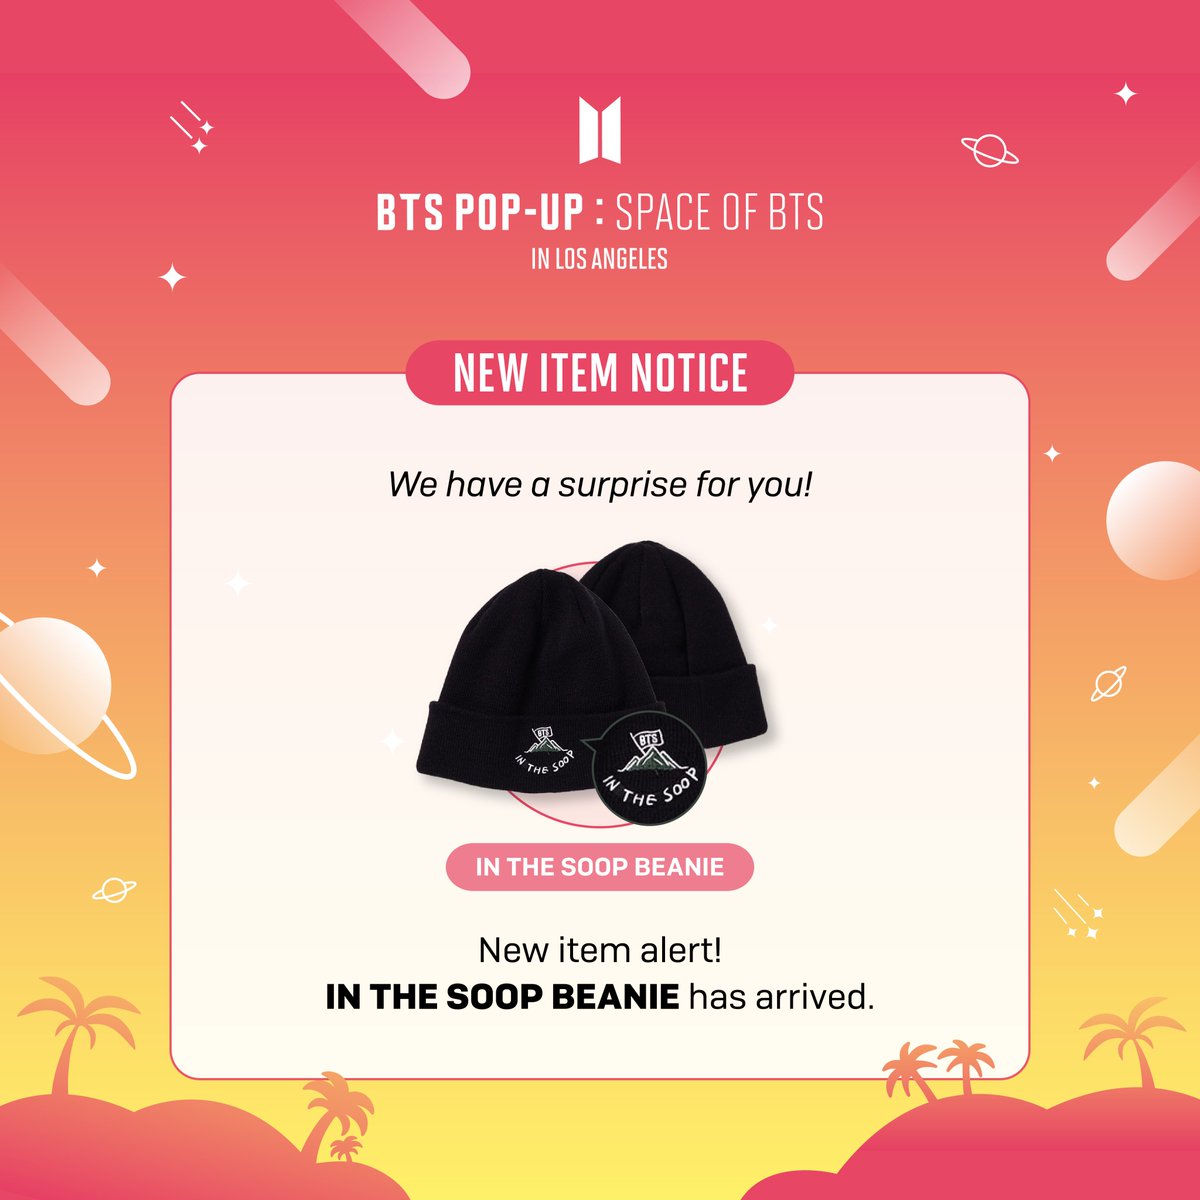 BTS POP-UP : SPACE OF BTS in LOS ANGELES

🛍️ NEW ITEMS JUST ARRIVED
Come visit us and take a look at the new items we have!

🔗 thepopupcloud.com
📆 ~ June 30, 2023
#BTS #SPACE_OF_BTS #LA